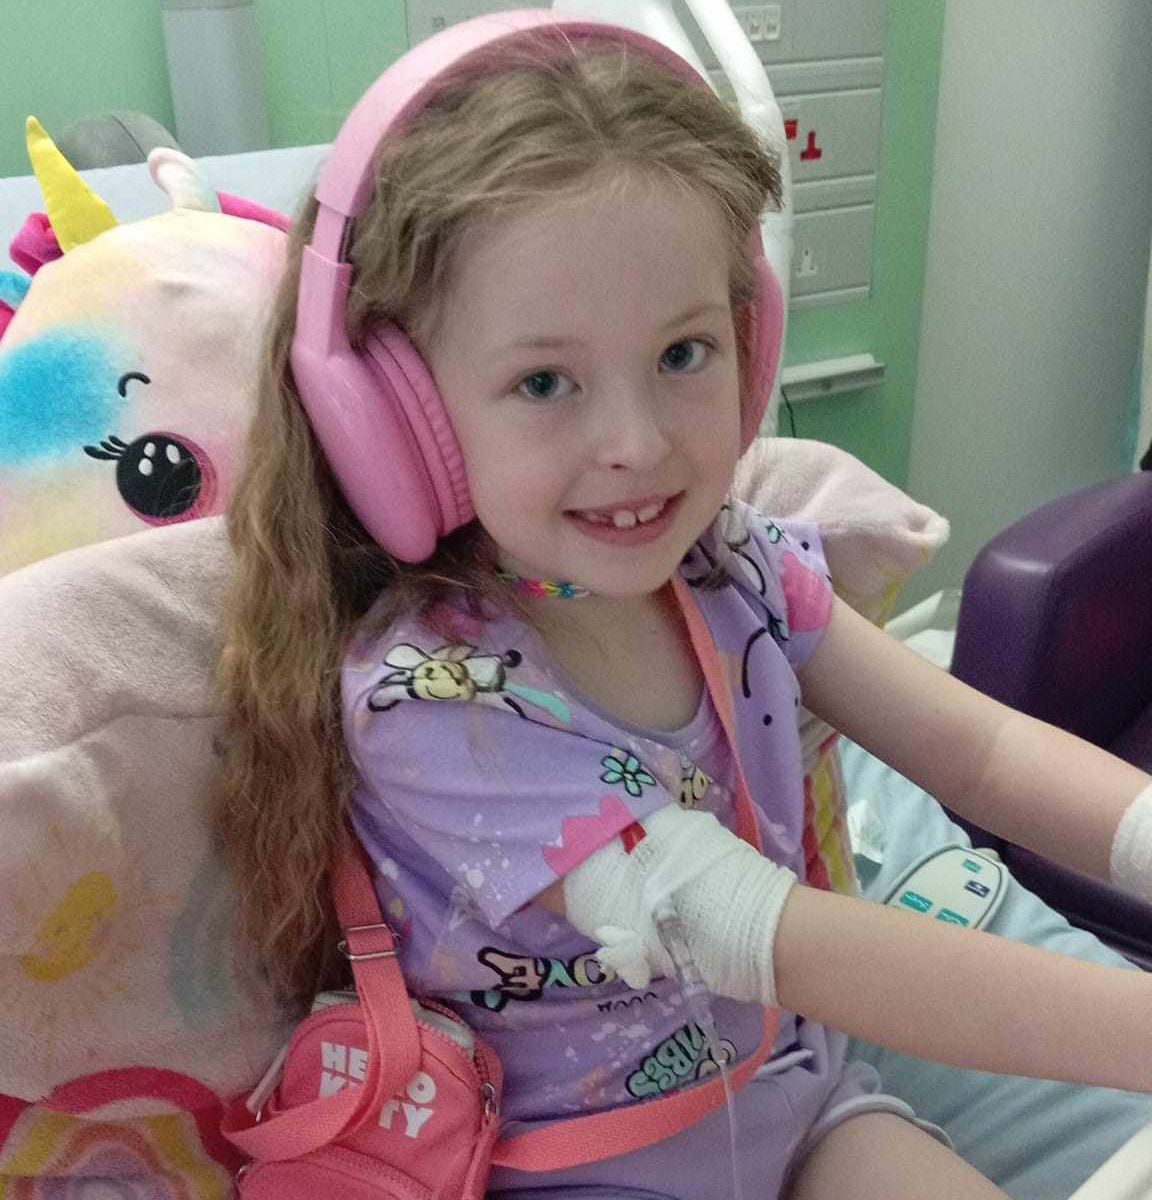 FIGHT: Gracie Doyle (7) receiving treatment in hospital